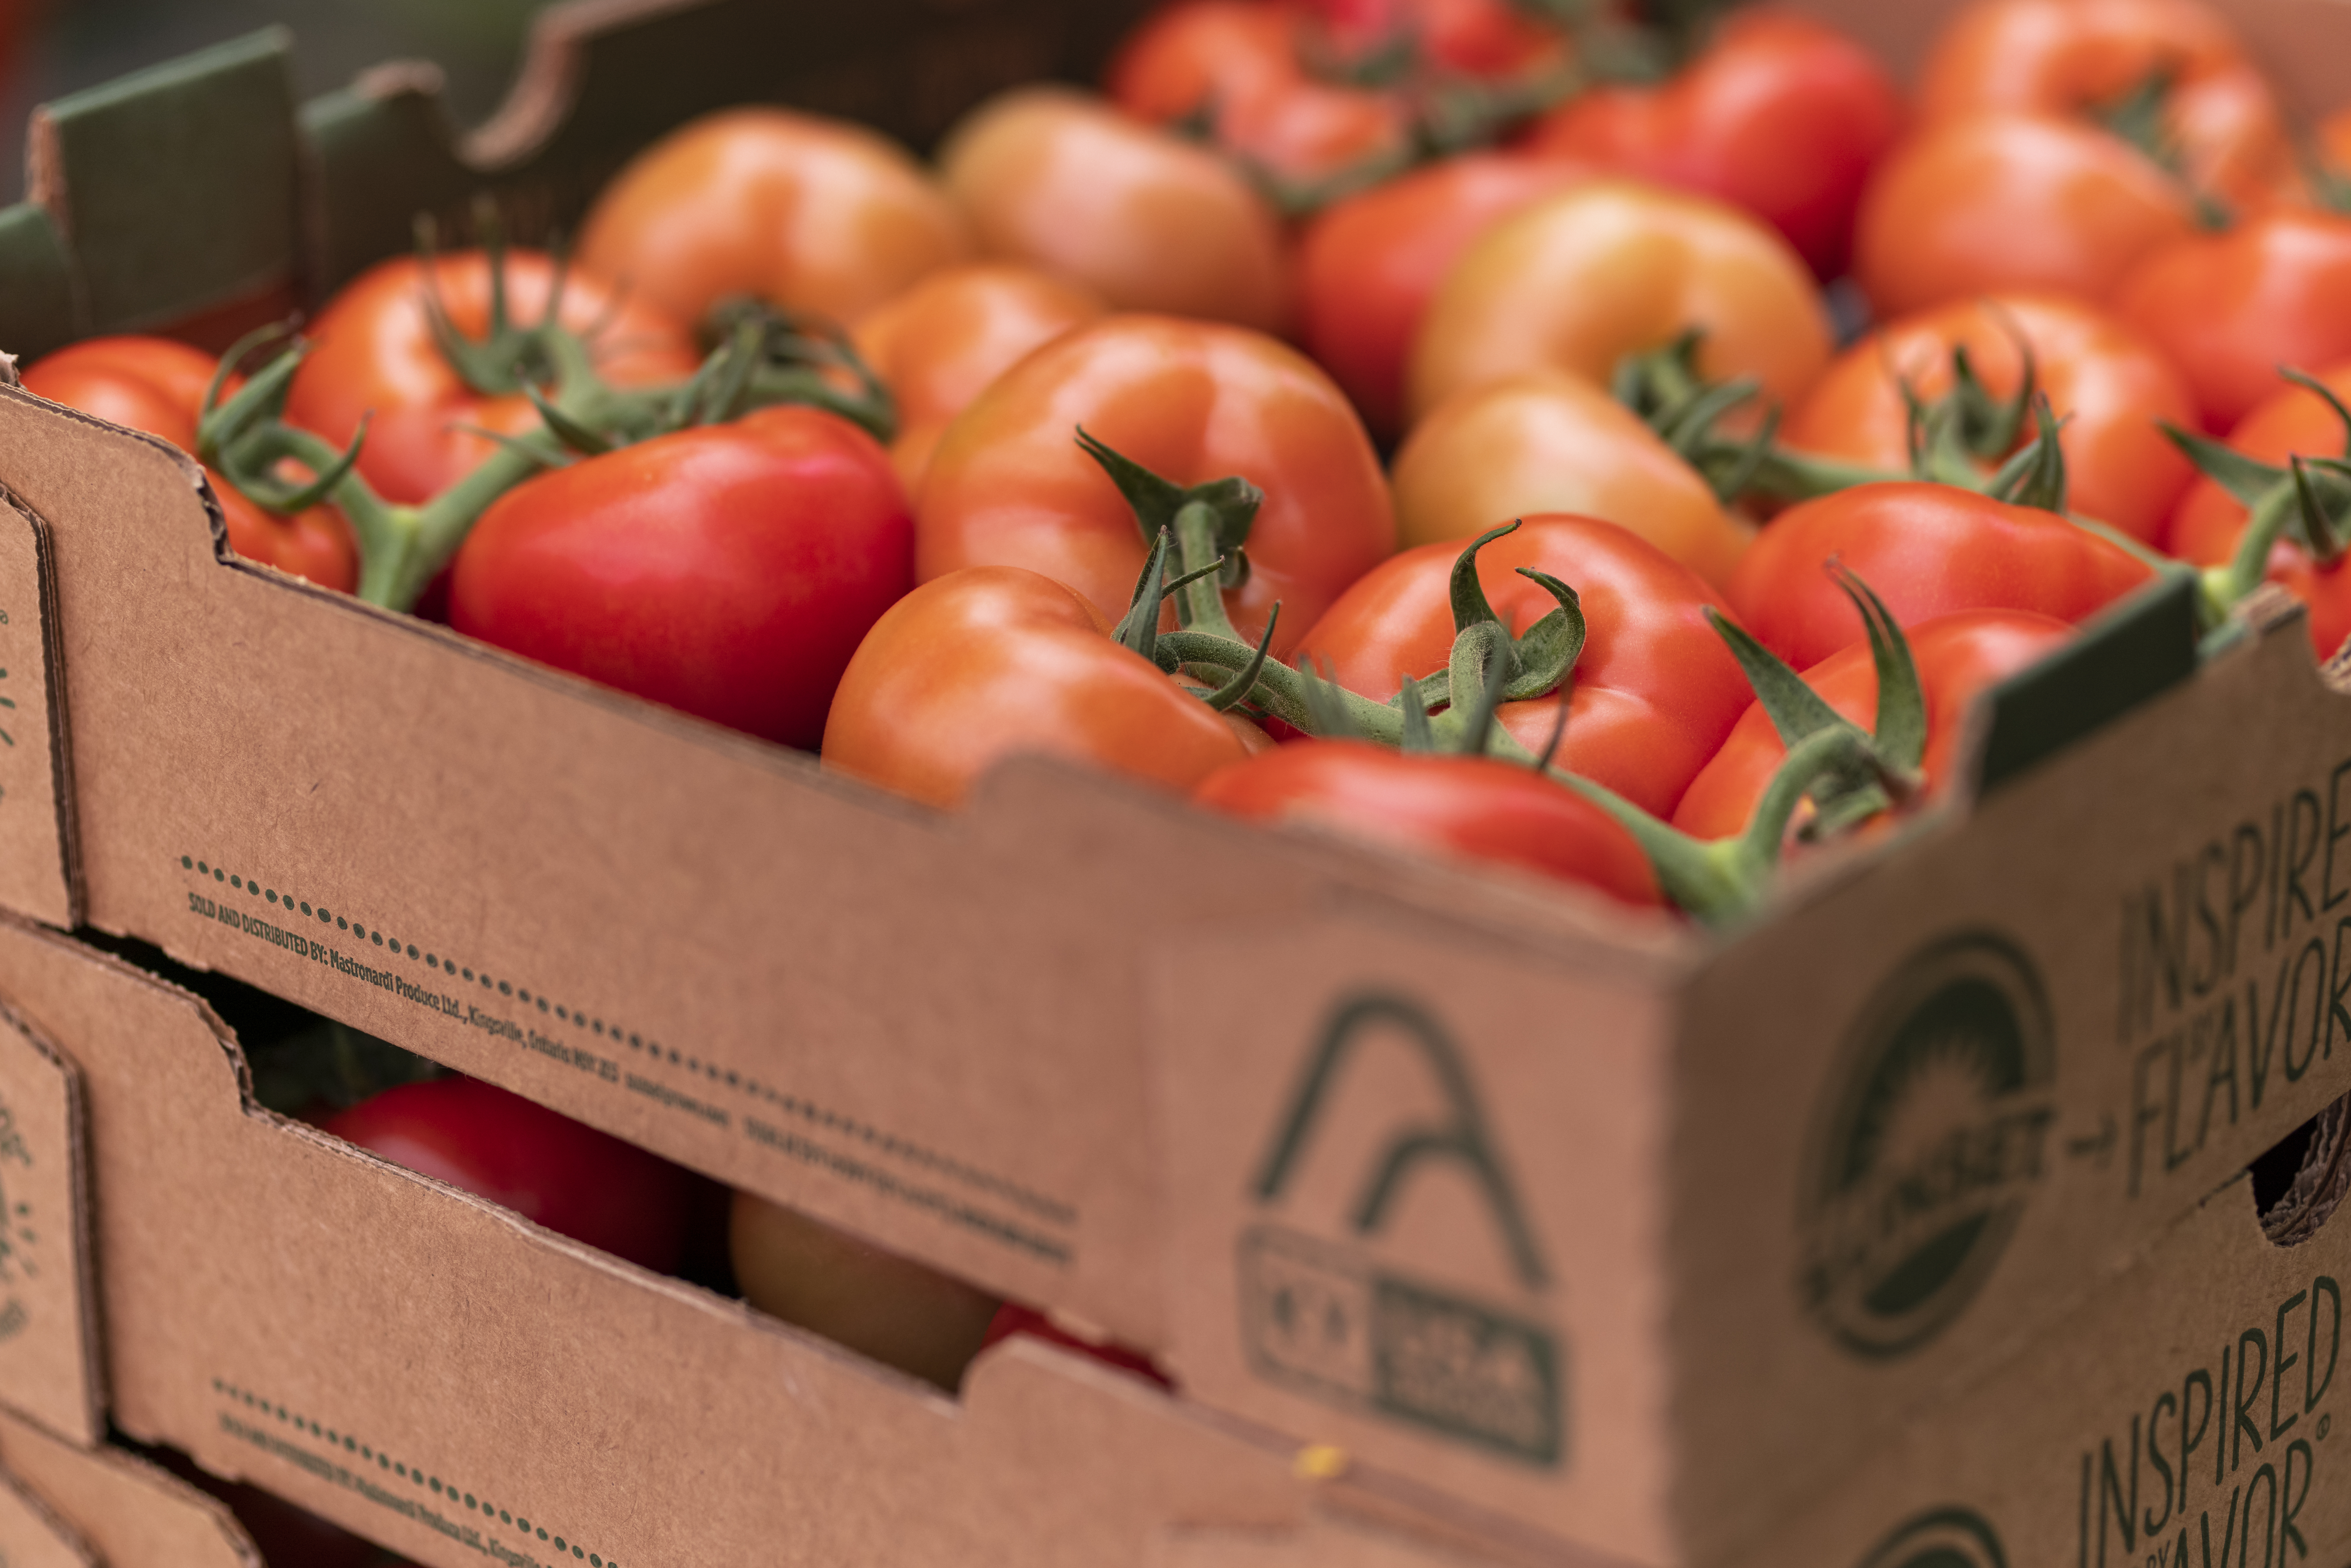 Tomatoes from AppHarvest&#039;s flagship 60-acre high-tech indoor farm in Morehead, Ky.